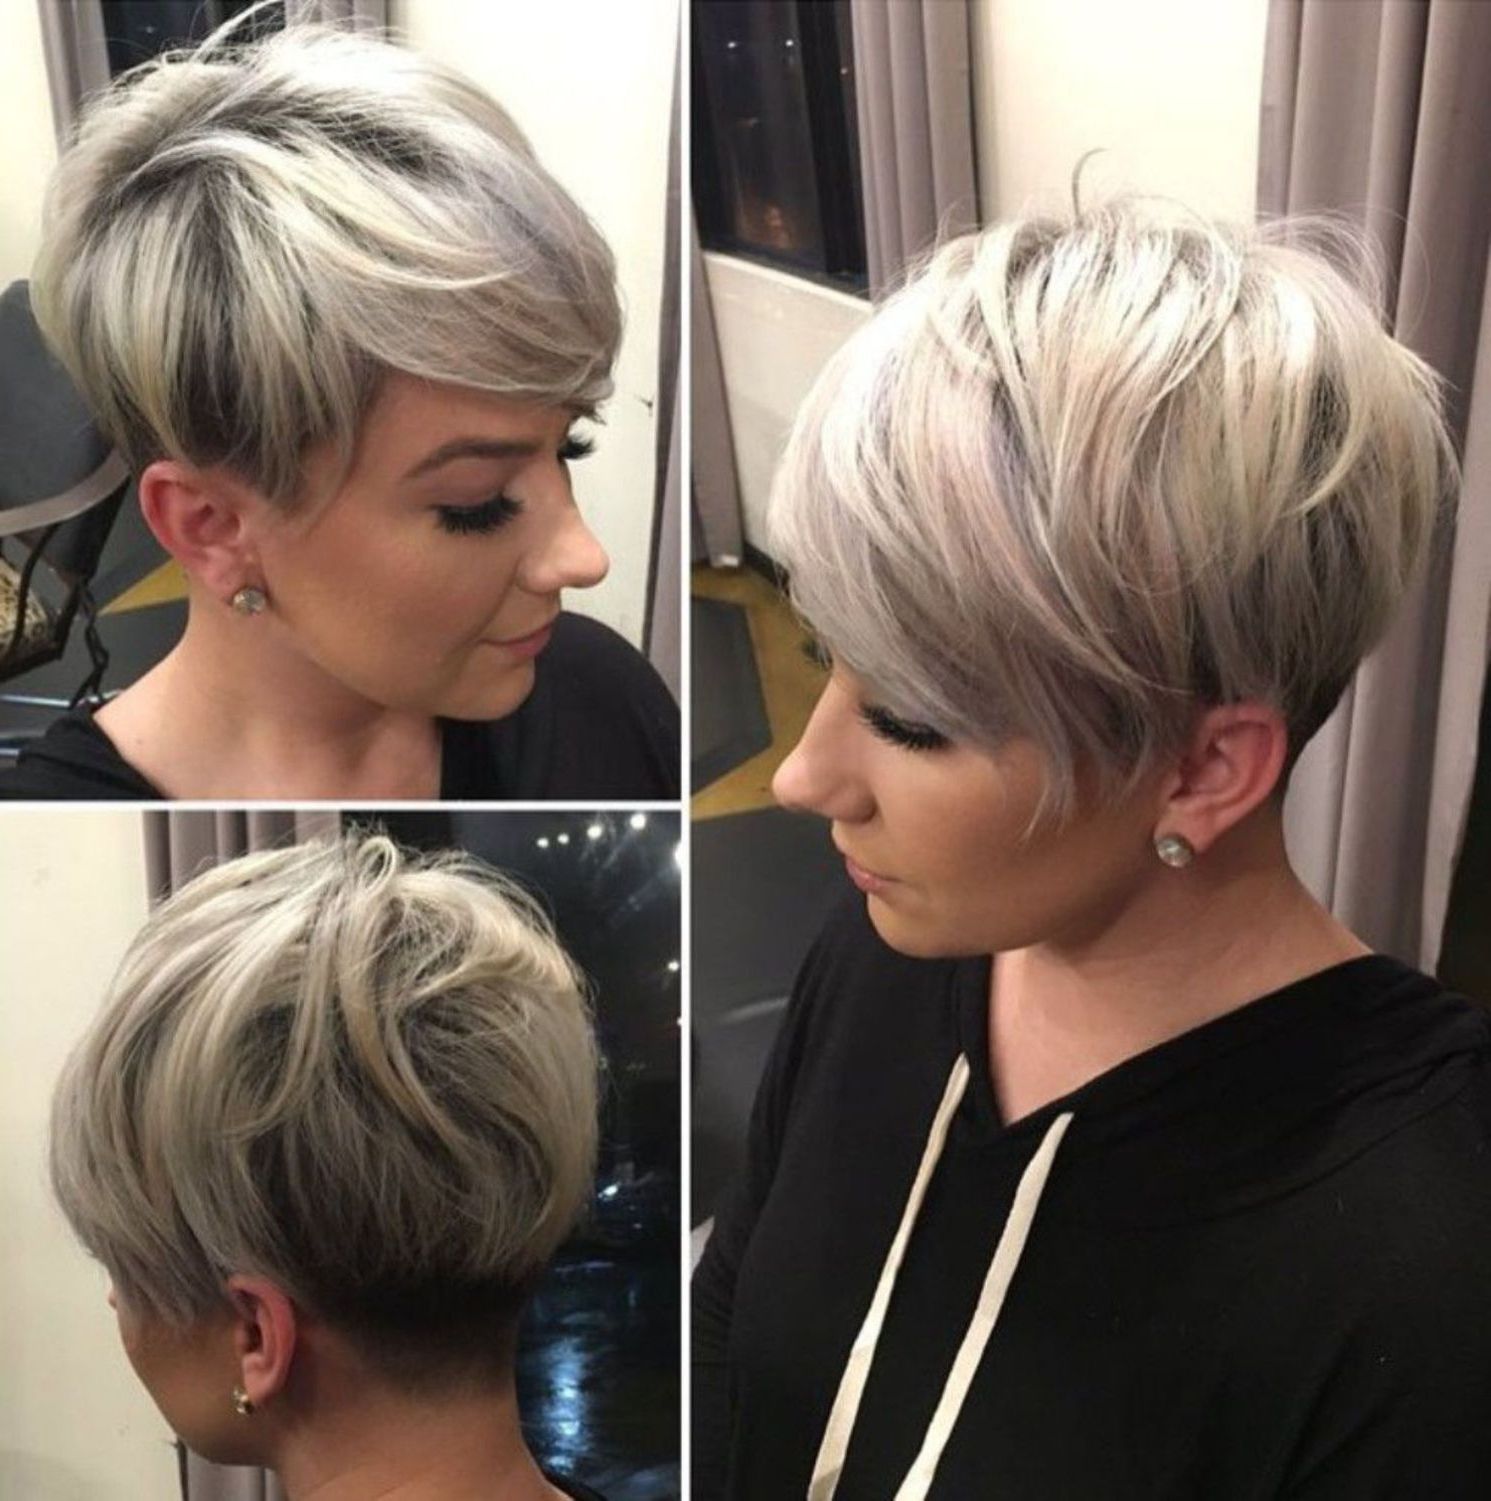 Pin On Silver Pixie, Curls, And Growout Goals Pertaining To Widely Used Sassy Short Pixie Haircuts With Bangs (View 1 of 20)